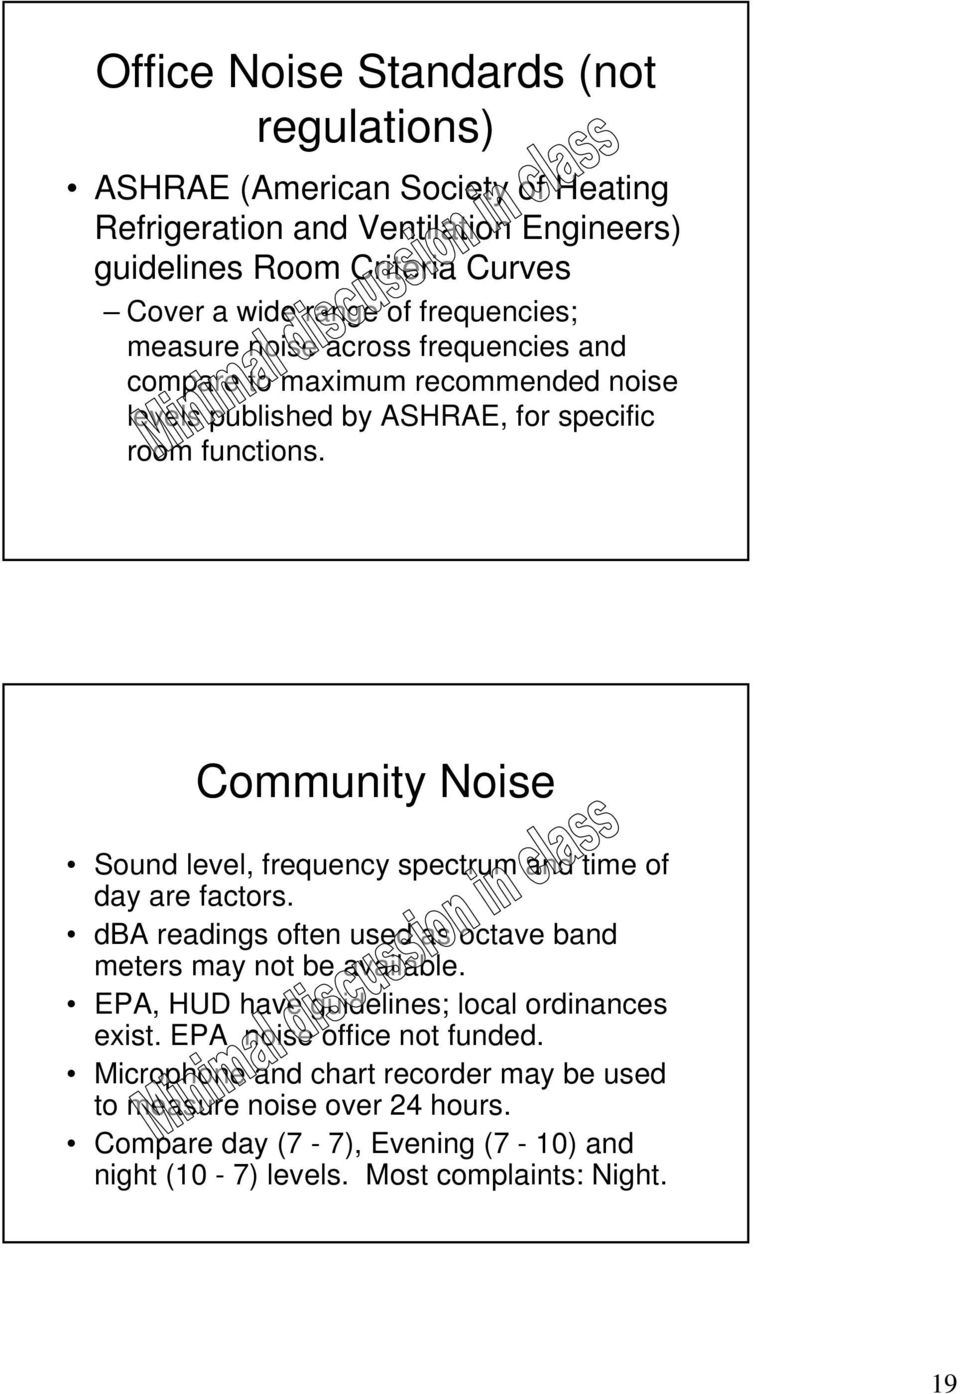 Community Noise Sound level, frequency spectrum and time of day are factors. dba readings often used as octave band meters may not be available.